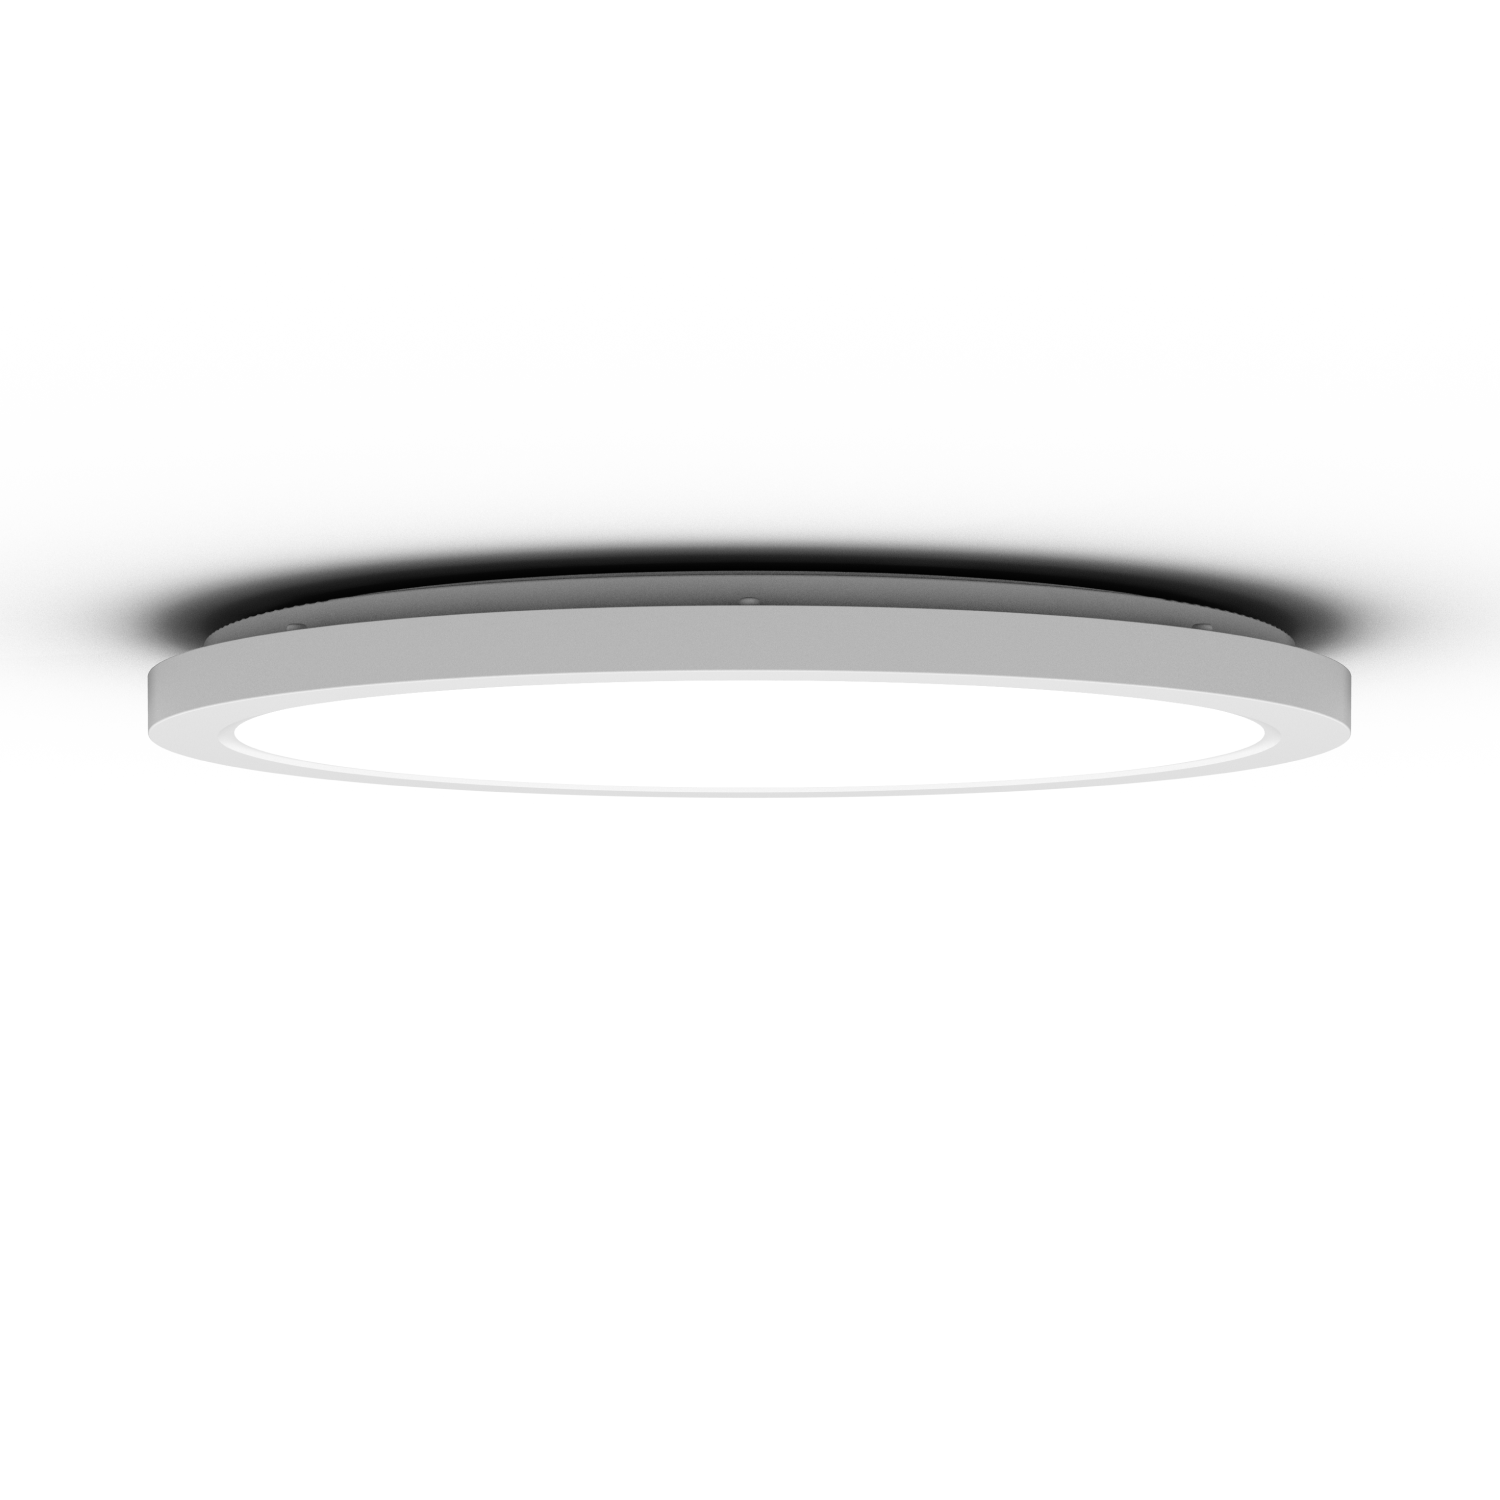 Sunco Lighting 13" Selectable 3 CCT White Ceiling Light Bright Downlight Top View